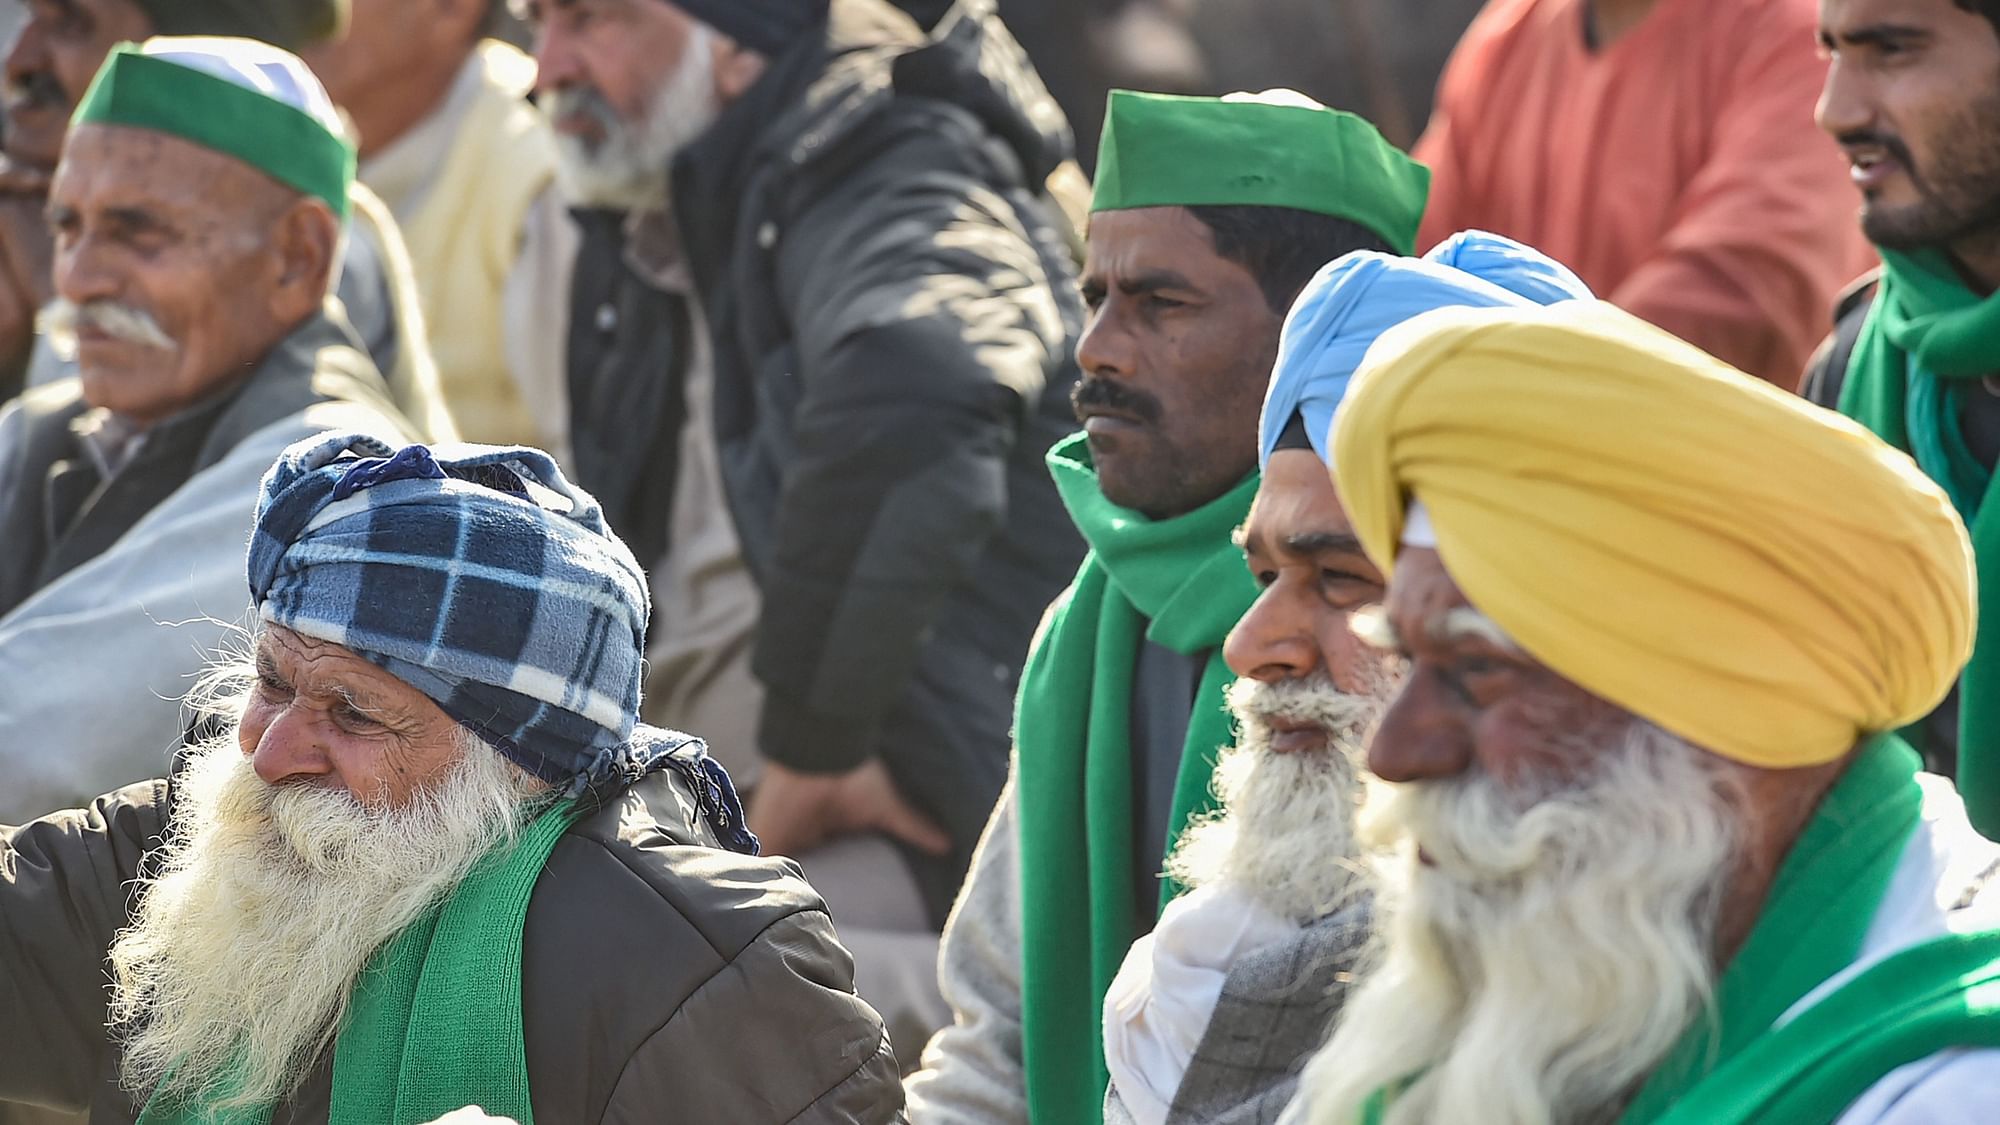 Farmers during their ongoing agitation against new farm laws, at Ghazipur border, in New Delhi. Image used for representation.